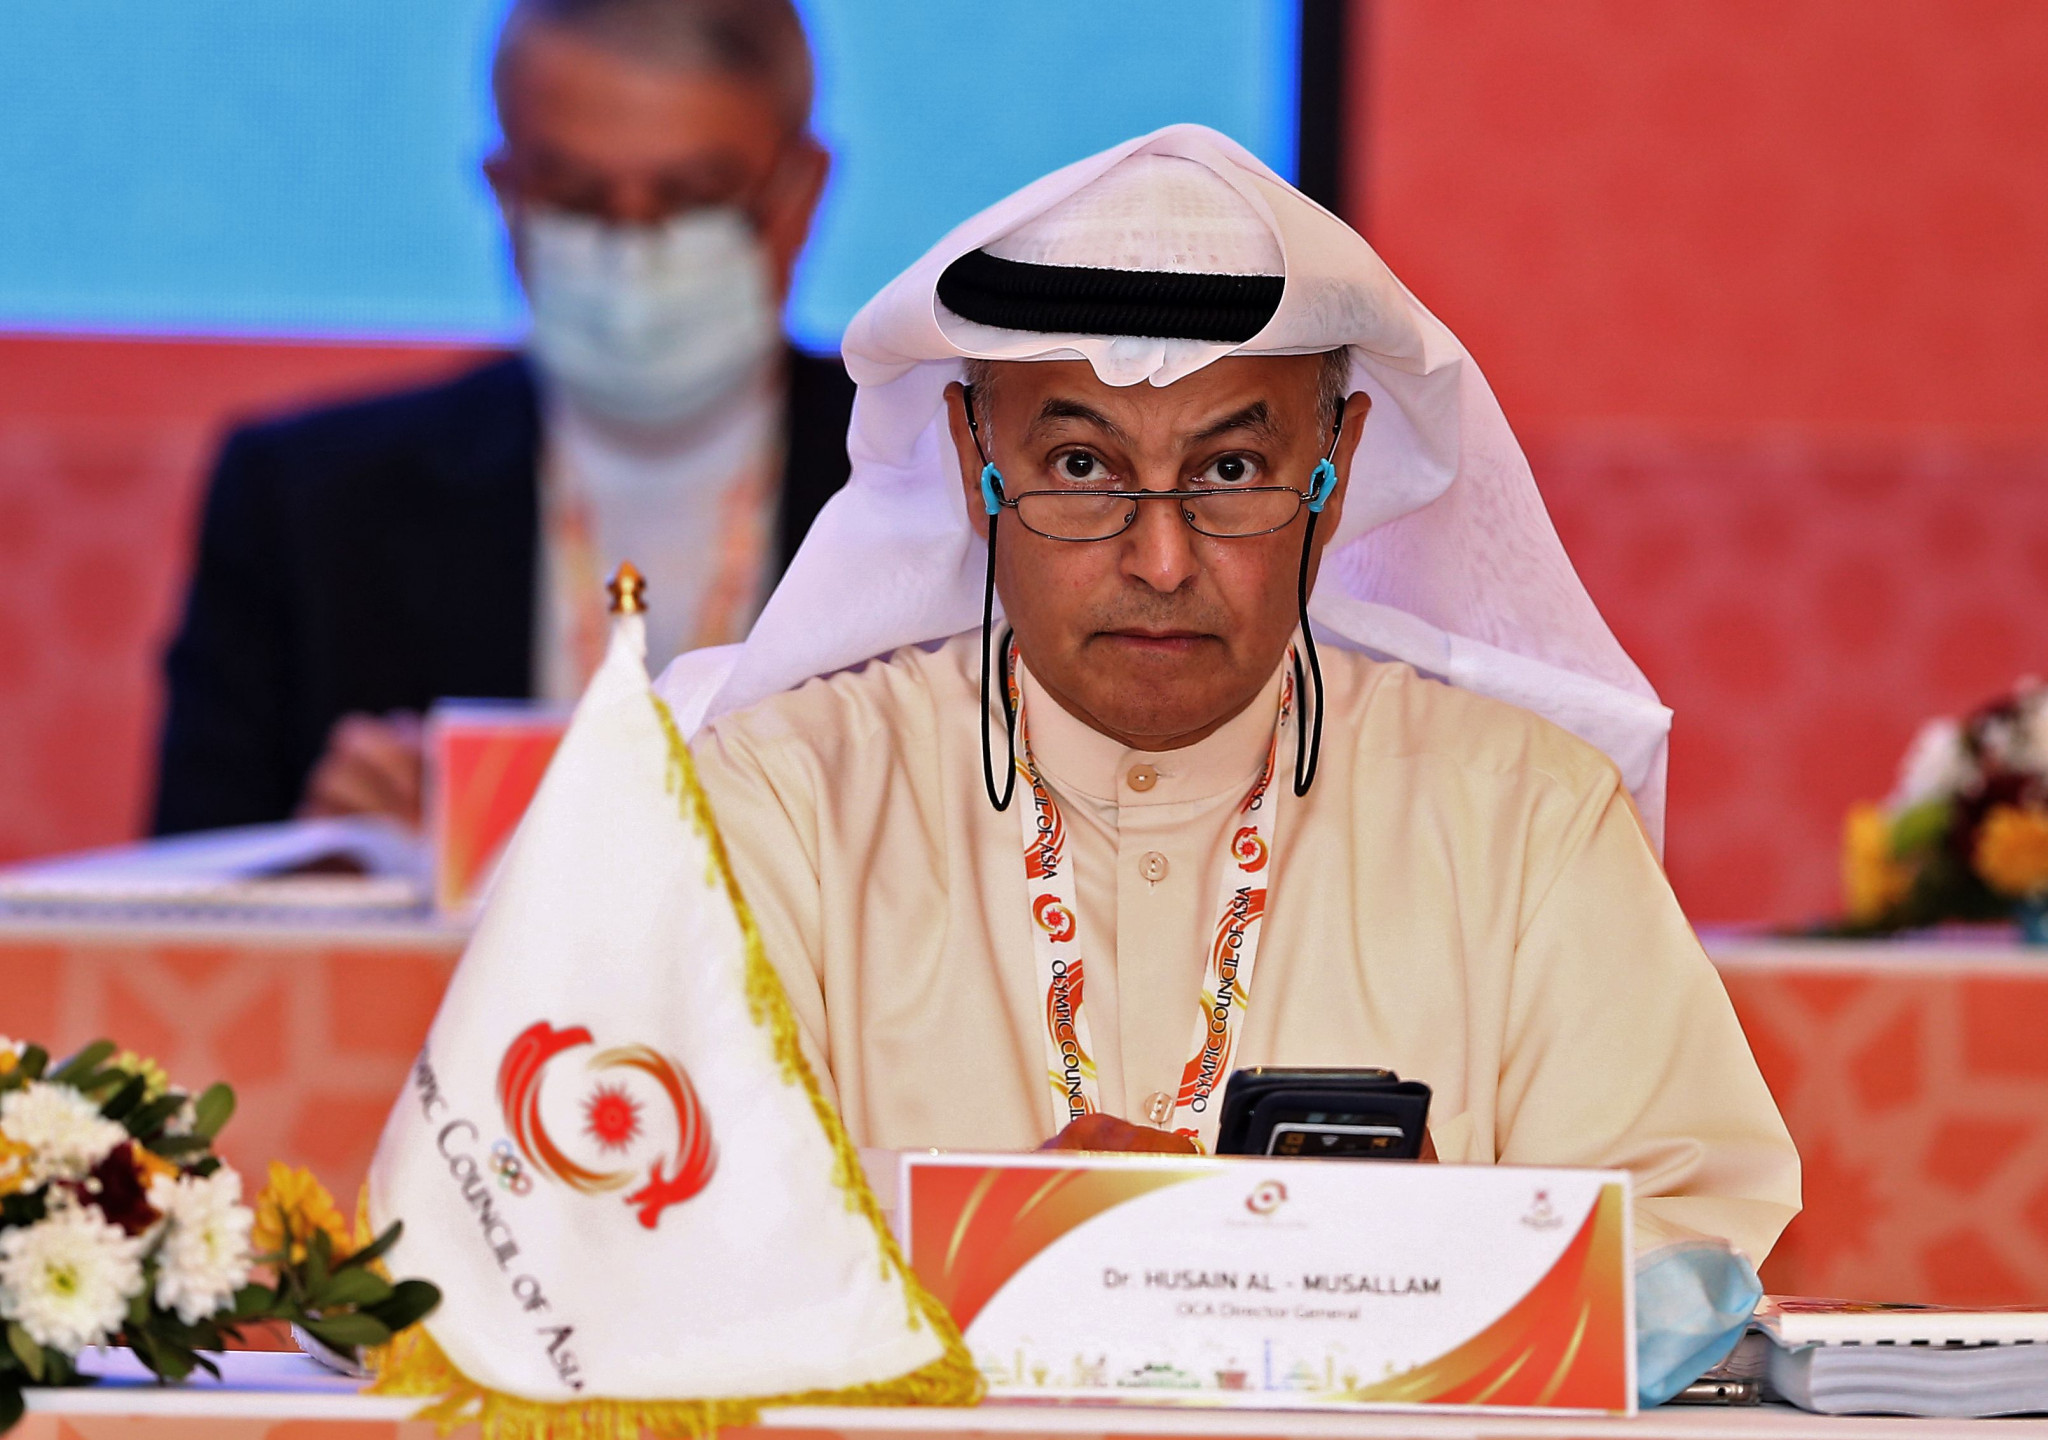 Husain Al Musallam has written a letter of appreciation to the Shantou Government for their efforts in staging the Asian Youth Games ©Getty Images